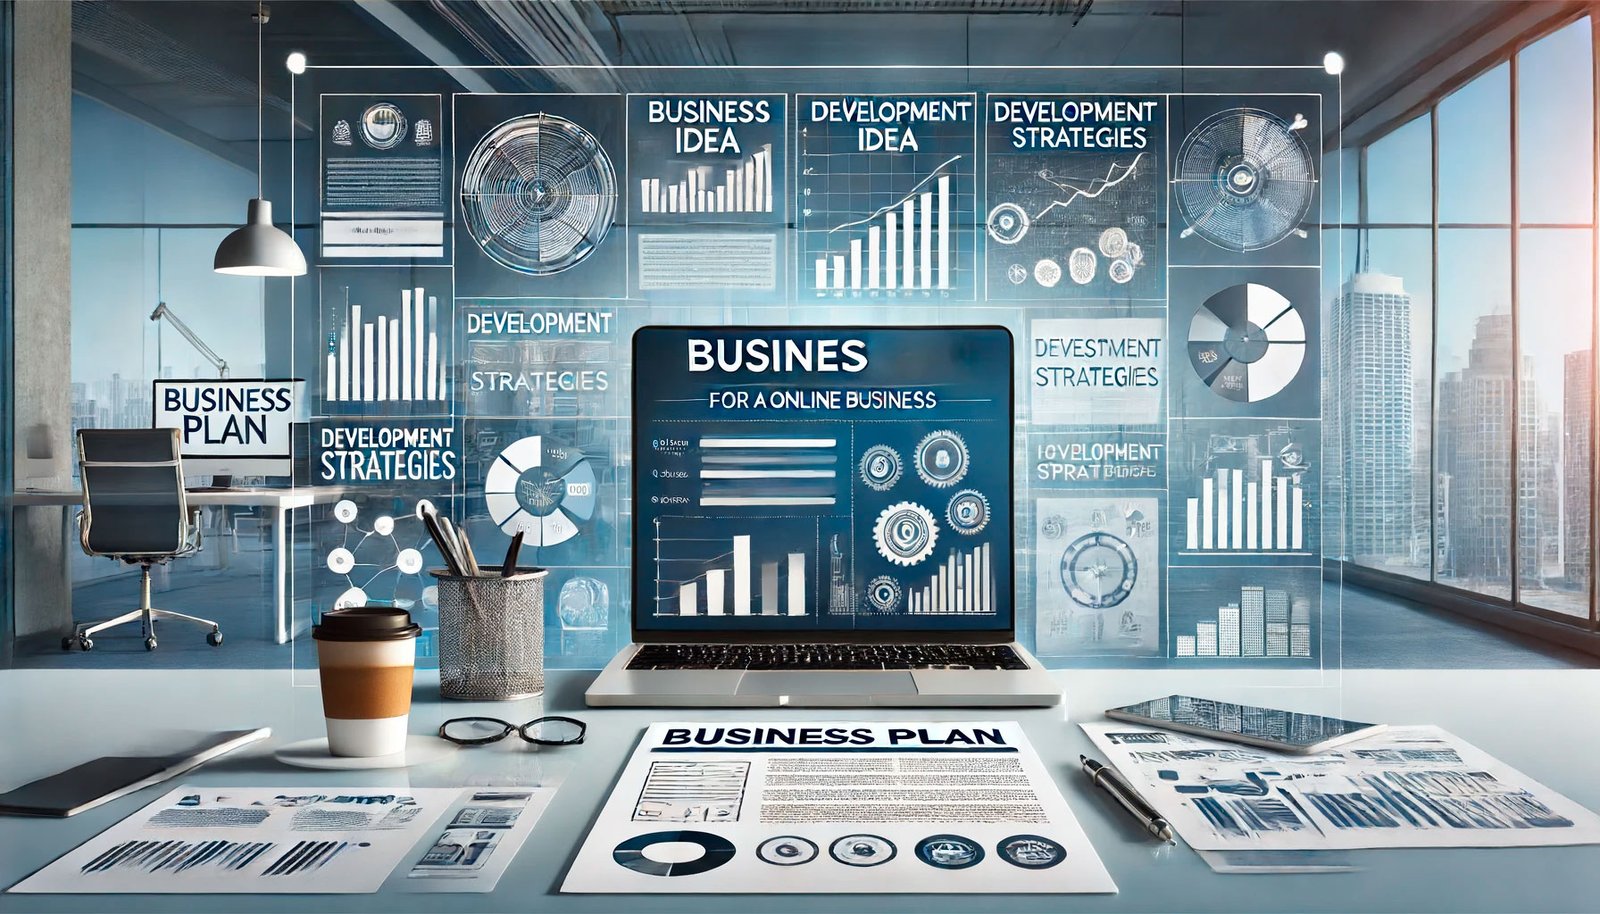 Business Plan For An Online Business